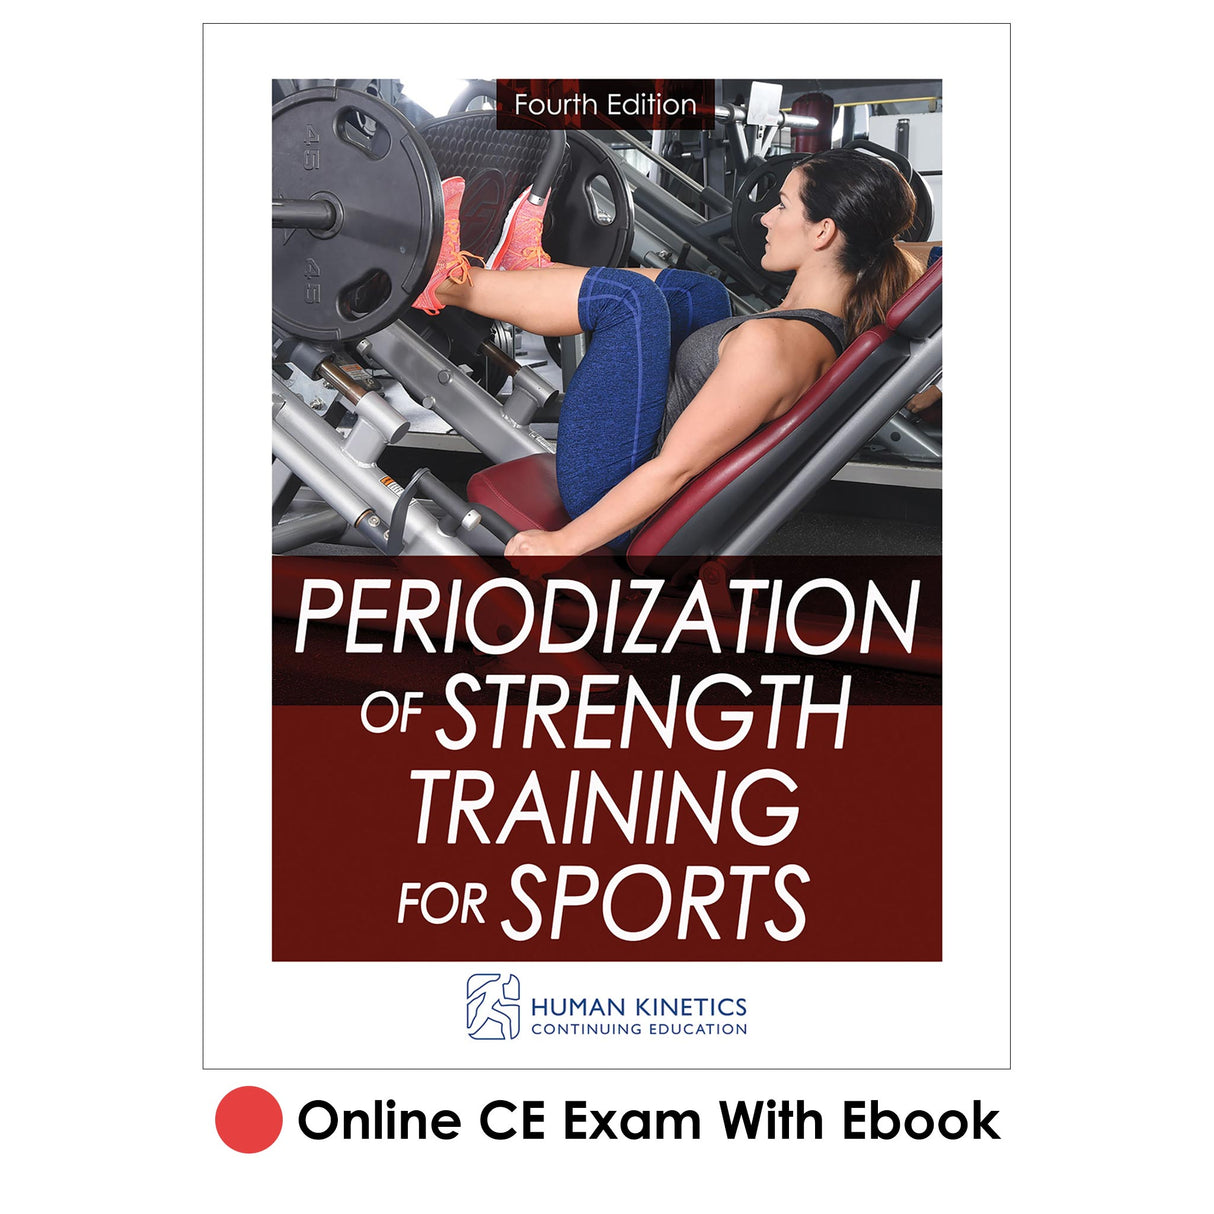 Periodization of Strength Training for Sports 4th Edition Online CE Exam With Ebook